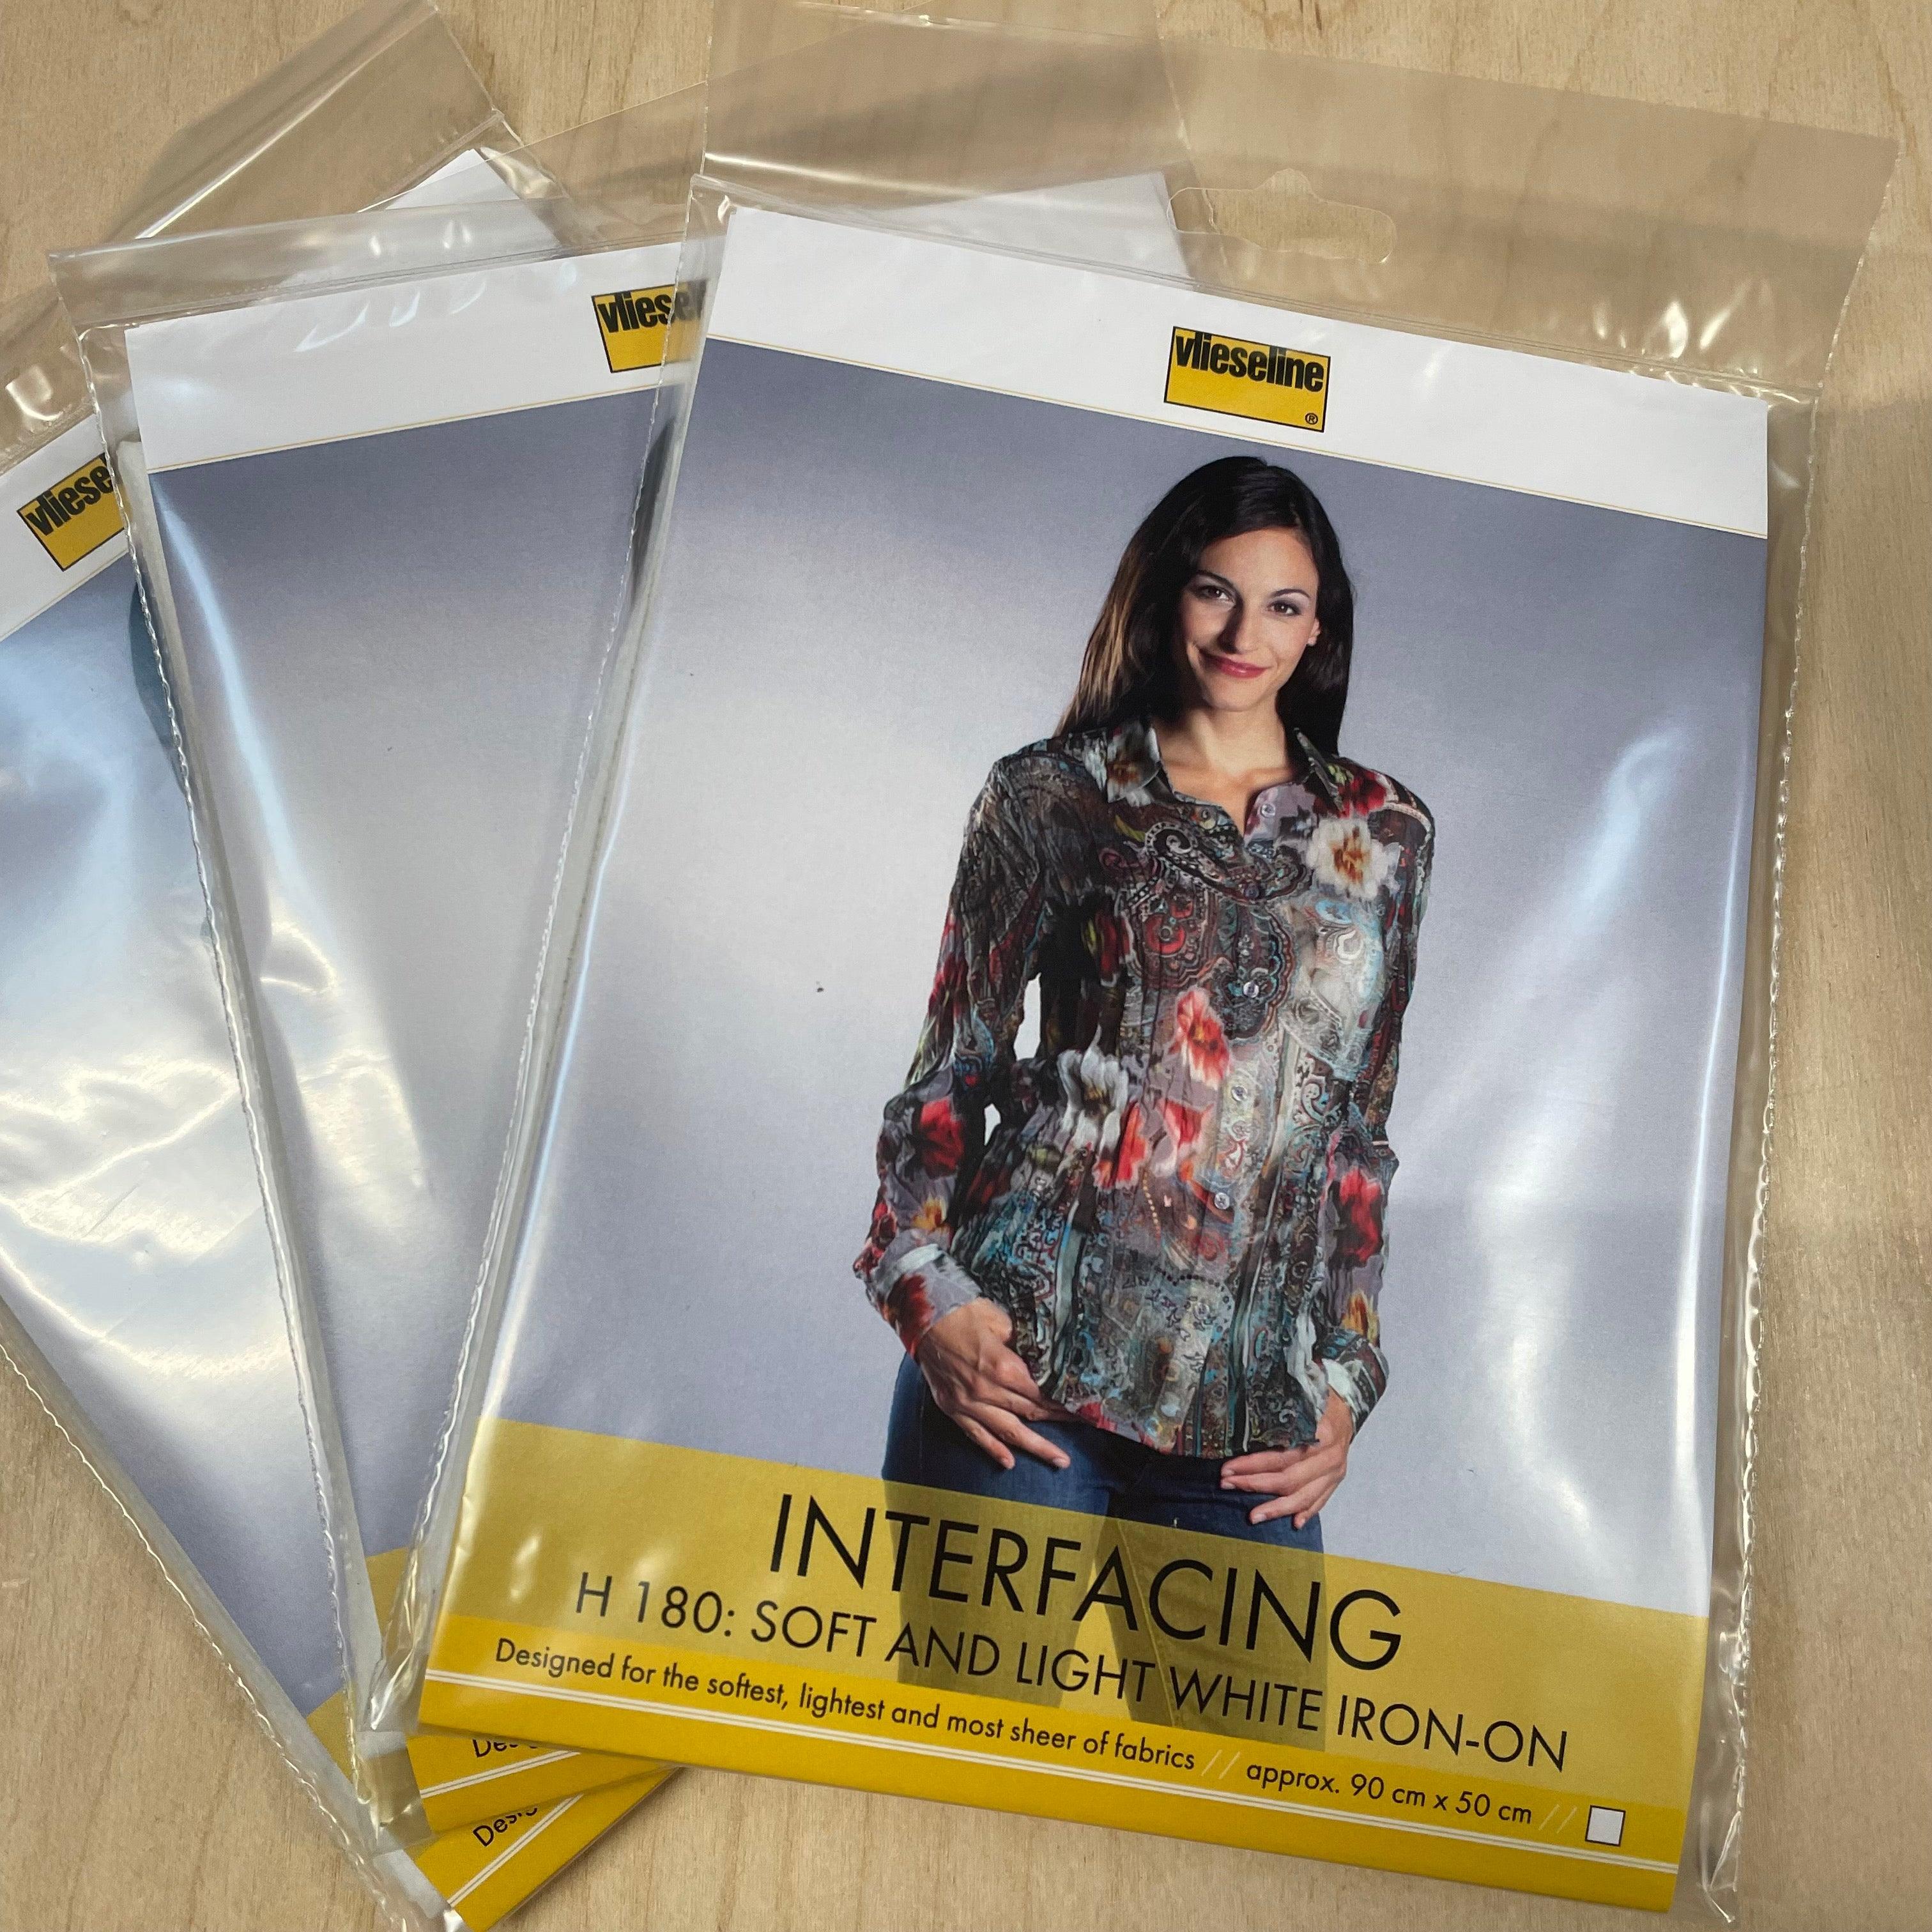 H180 Iron on interfacing WHITE for soft and lightweight fabrics